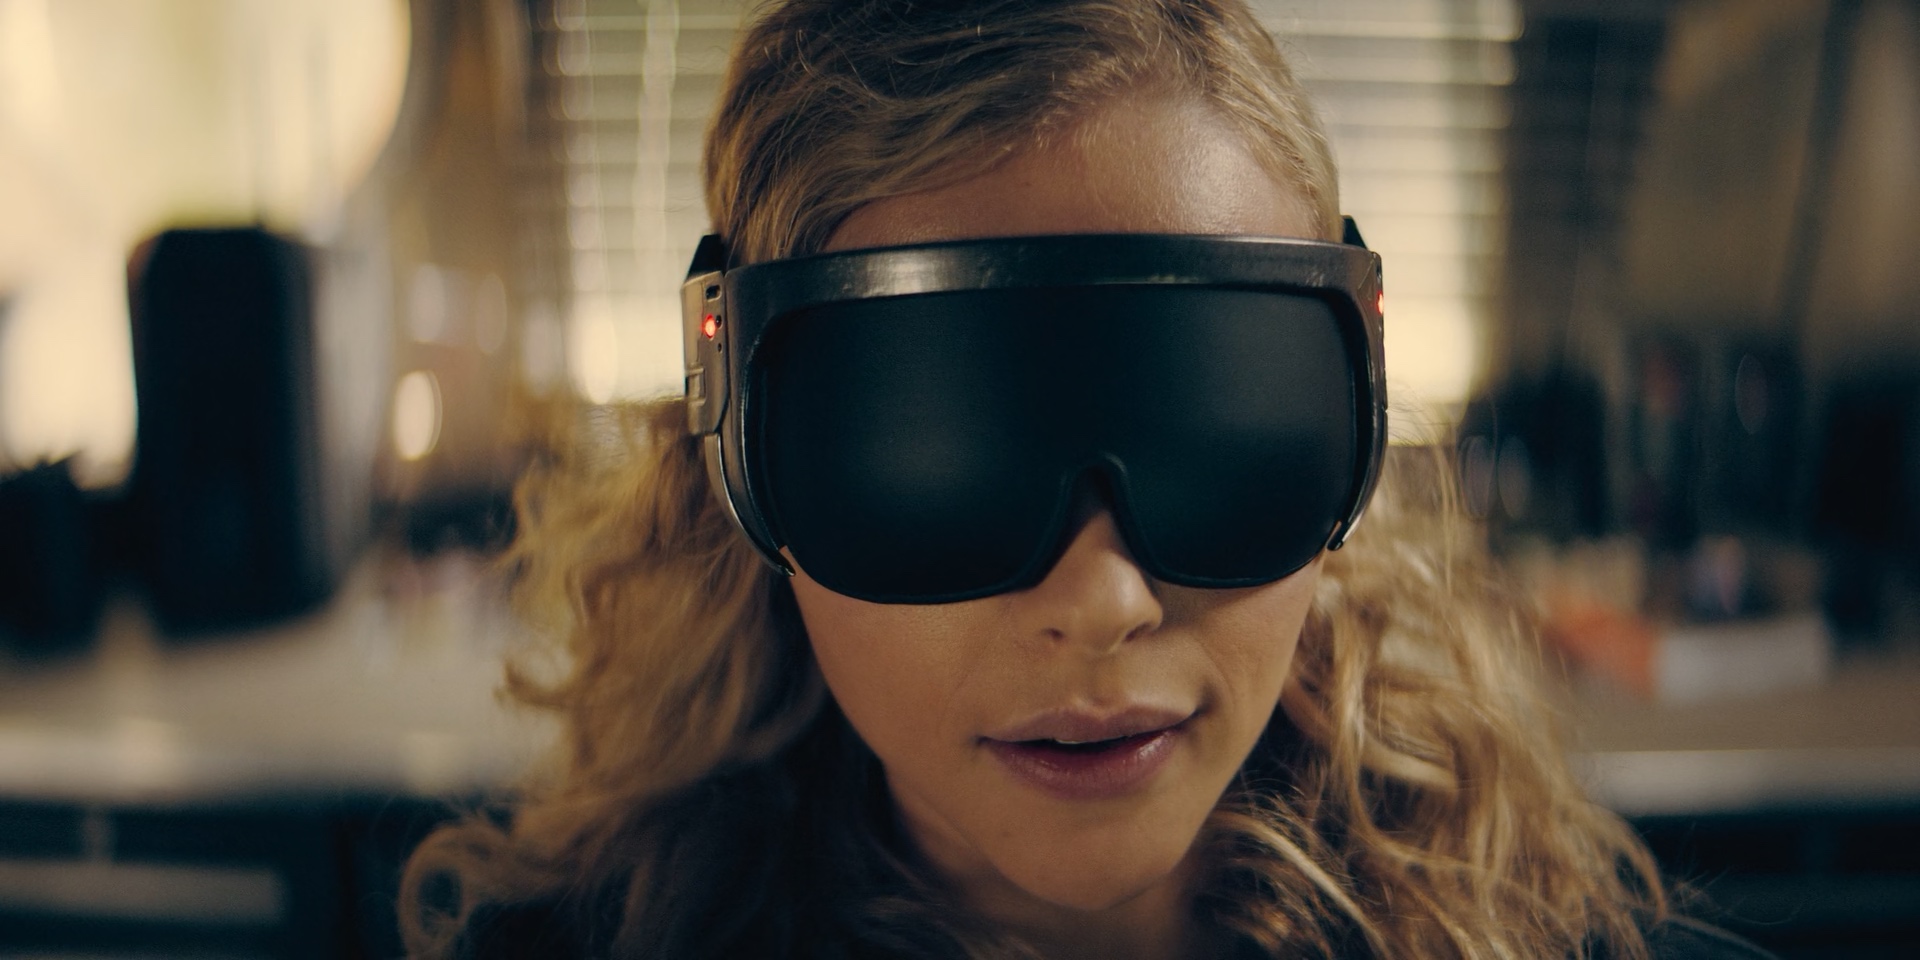 VR as seen in “The Peripheral”